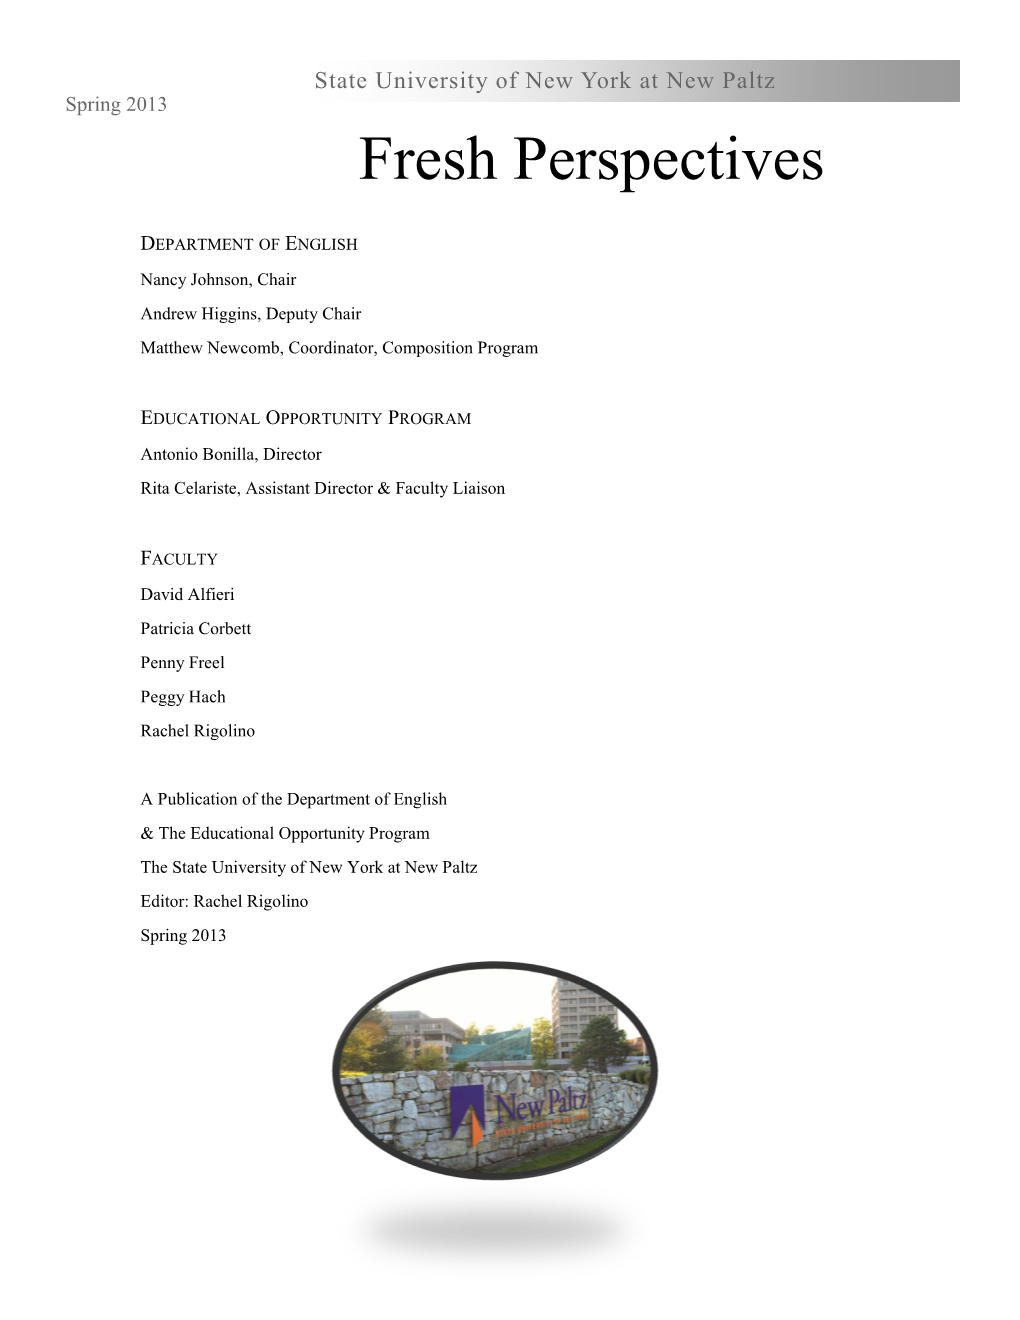 Fresh Perspectives Fall 2013